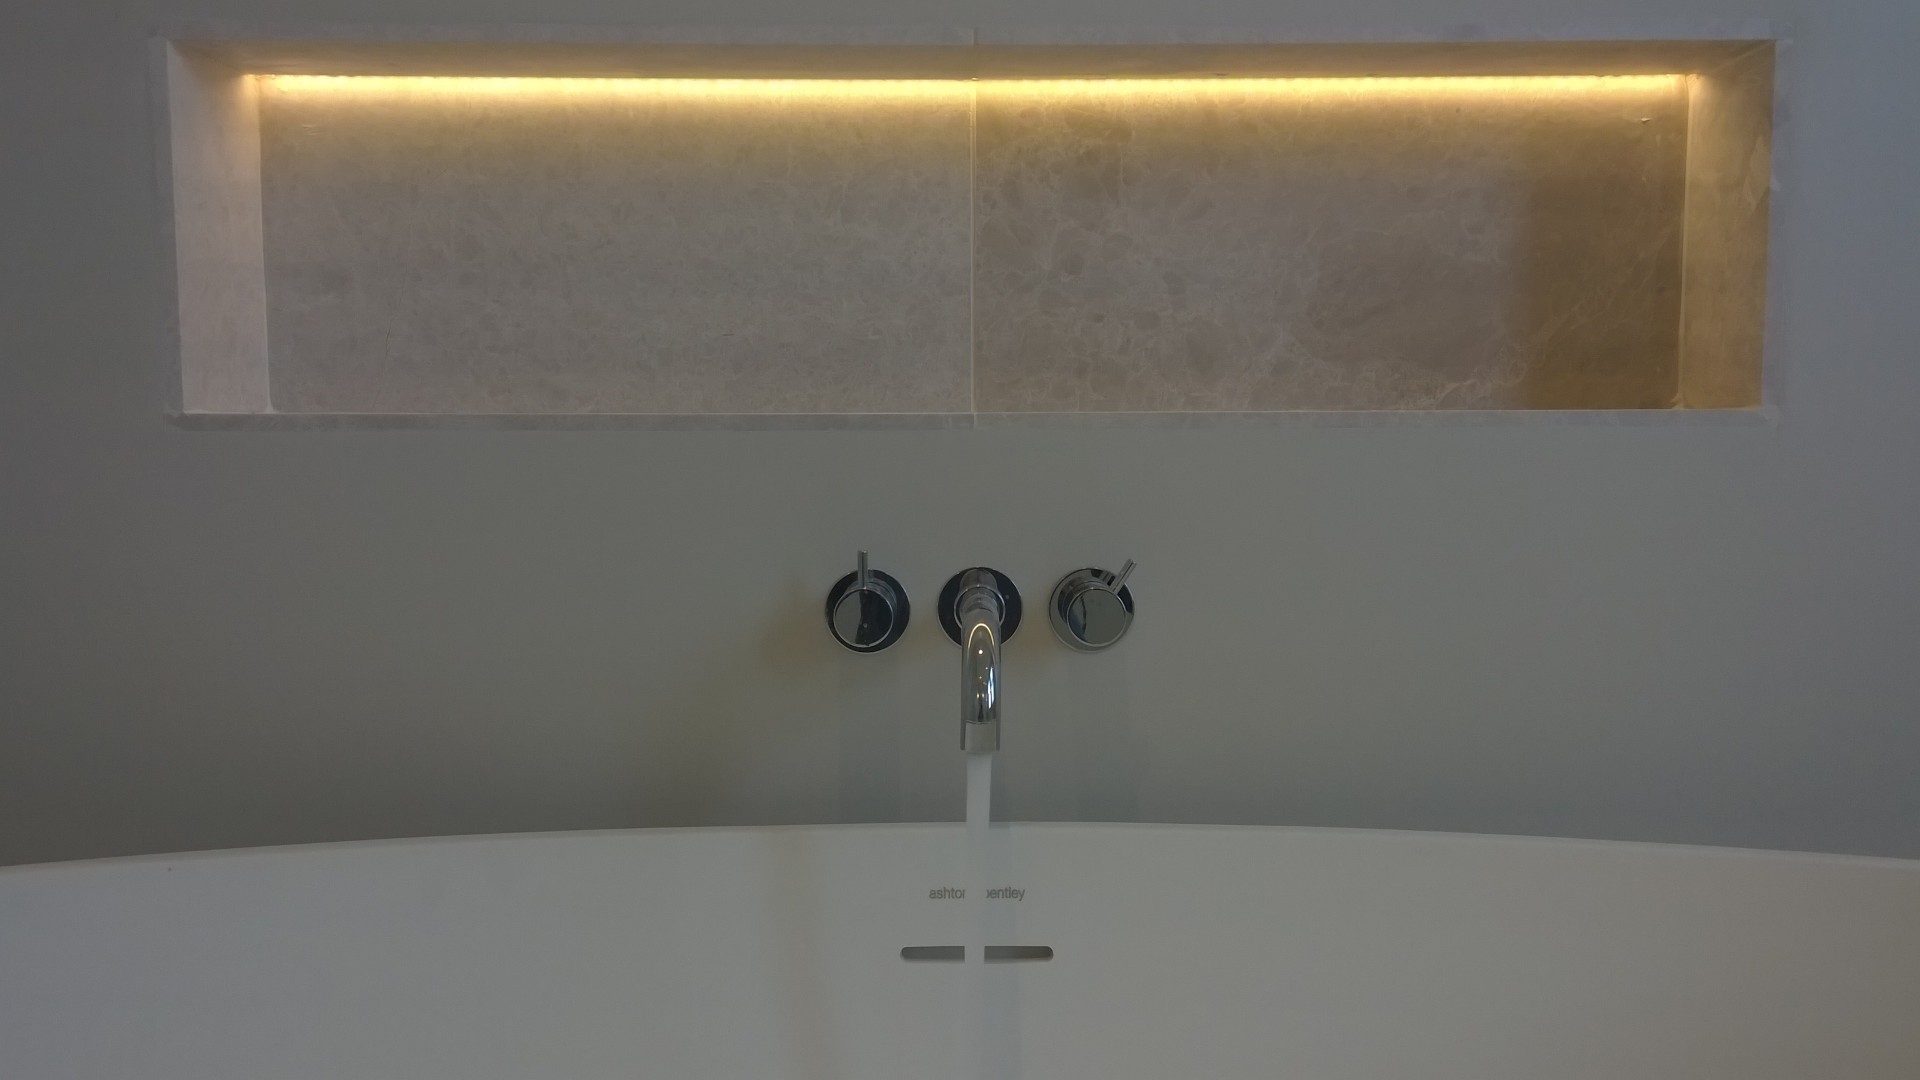 Recessed shelf with an LED ligting strip